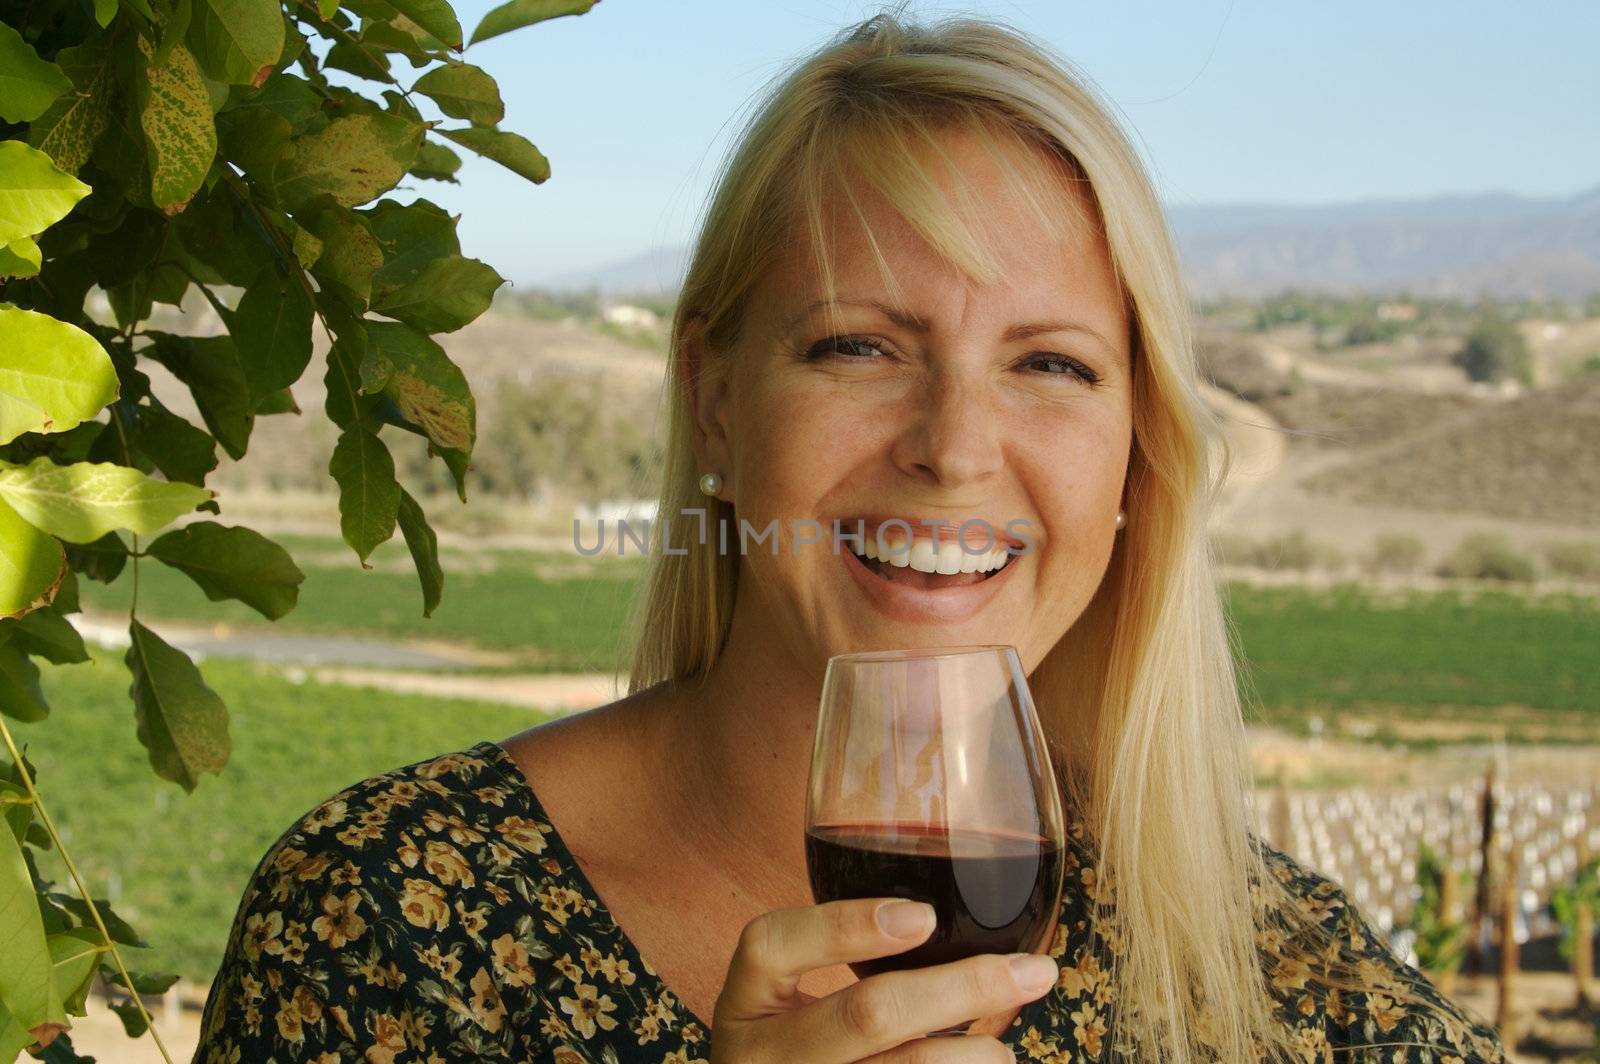 Attractive Woman Sips Wine at a Winery in the country.